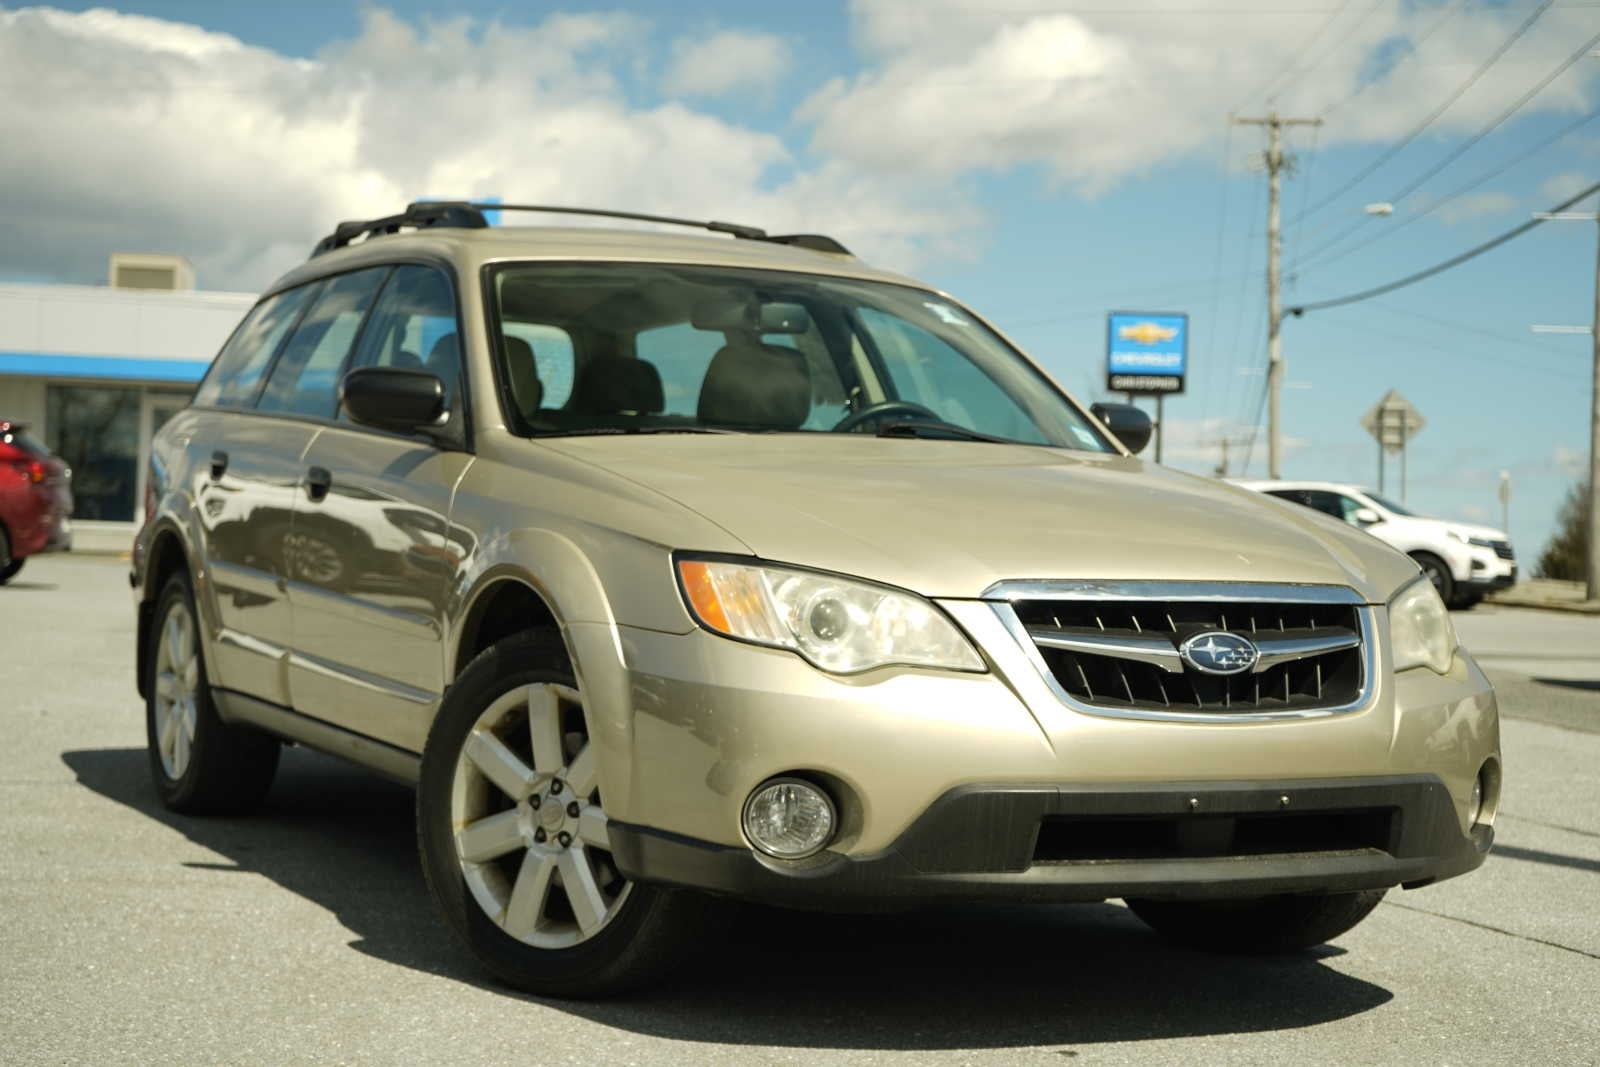 Used 2008 Subaru Outback 2.5i with VIN 4S4BP61C787349879 for sale in Ticonderoga, NY